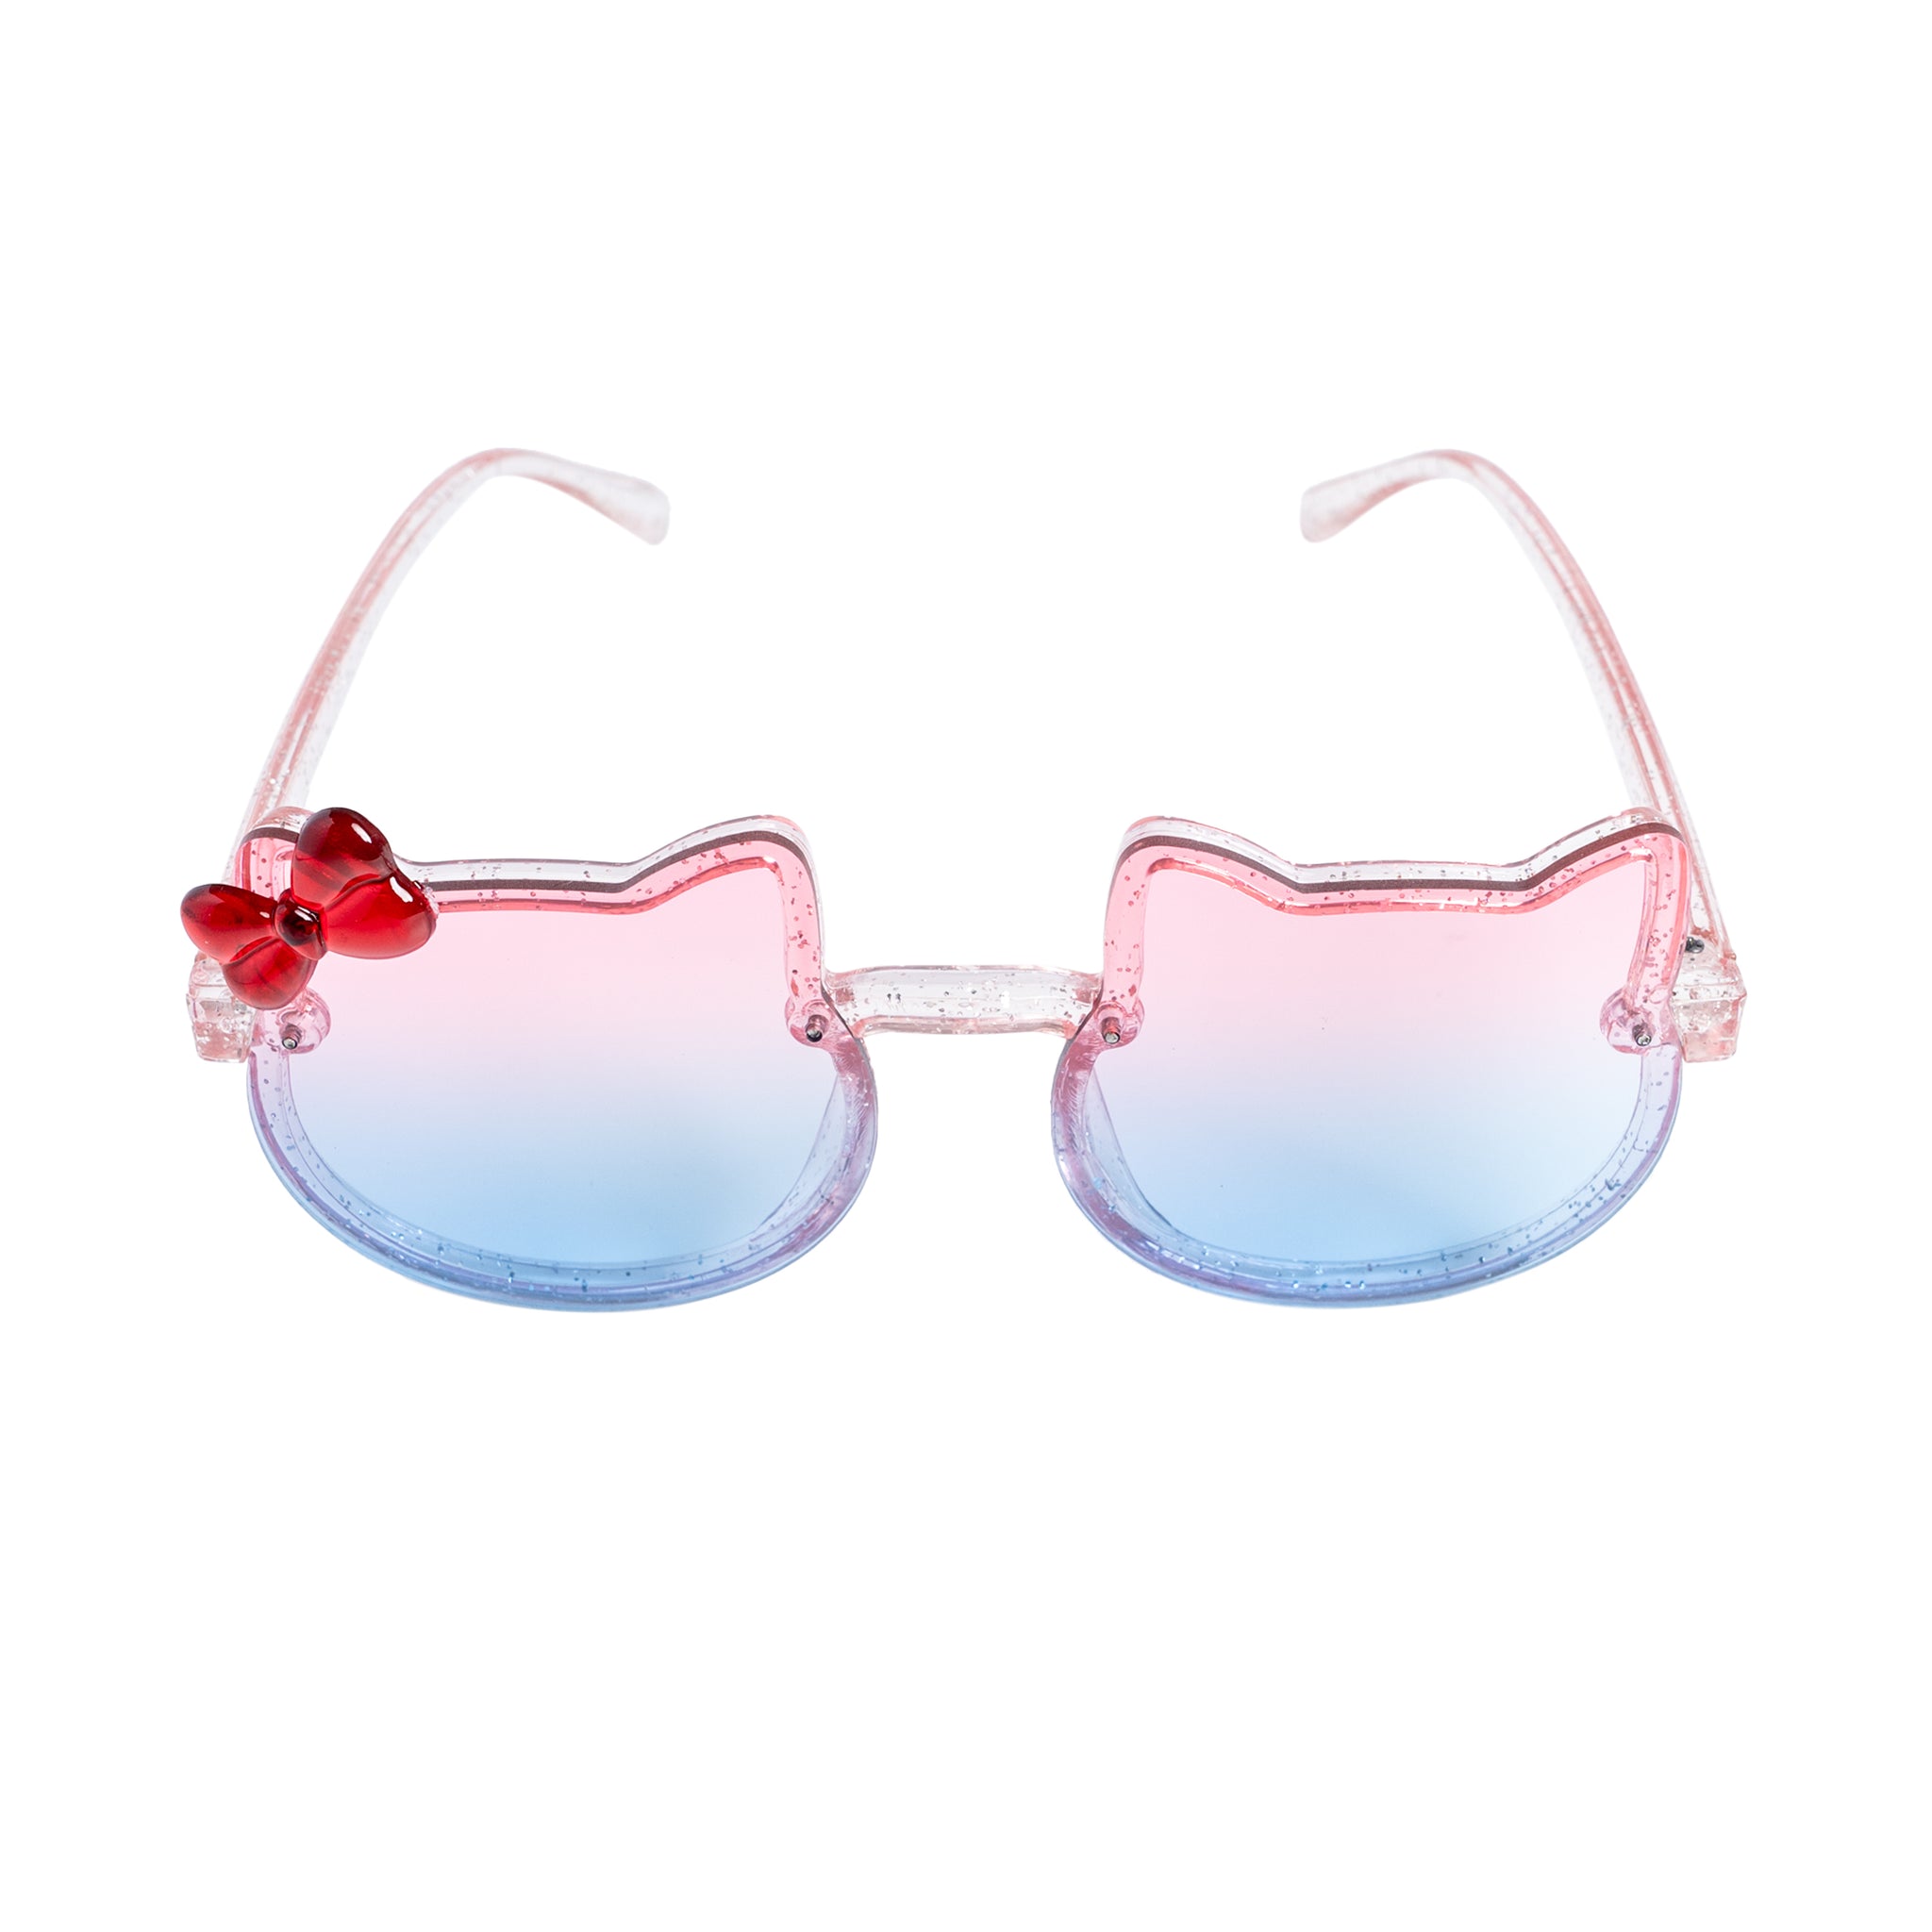 Chokore Kitty Sunglasses with Bow